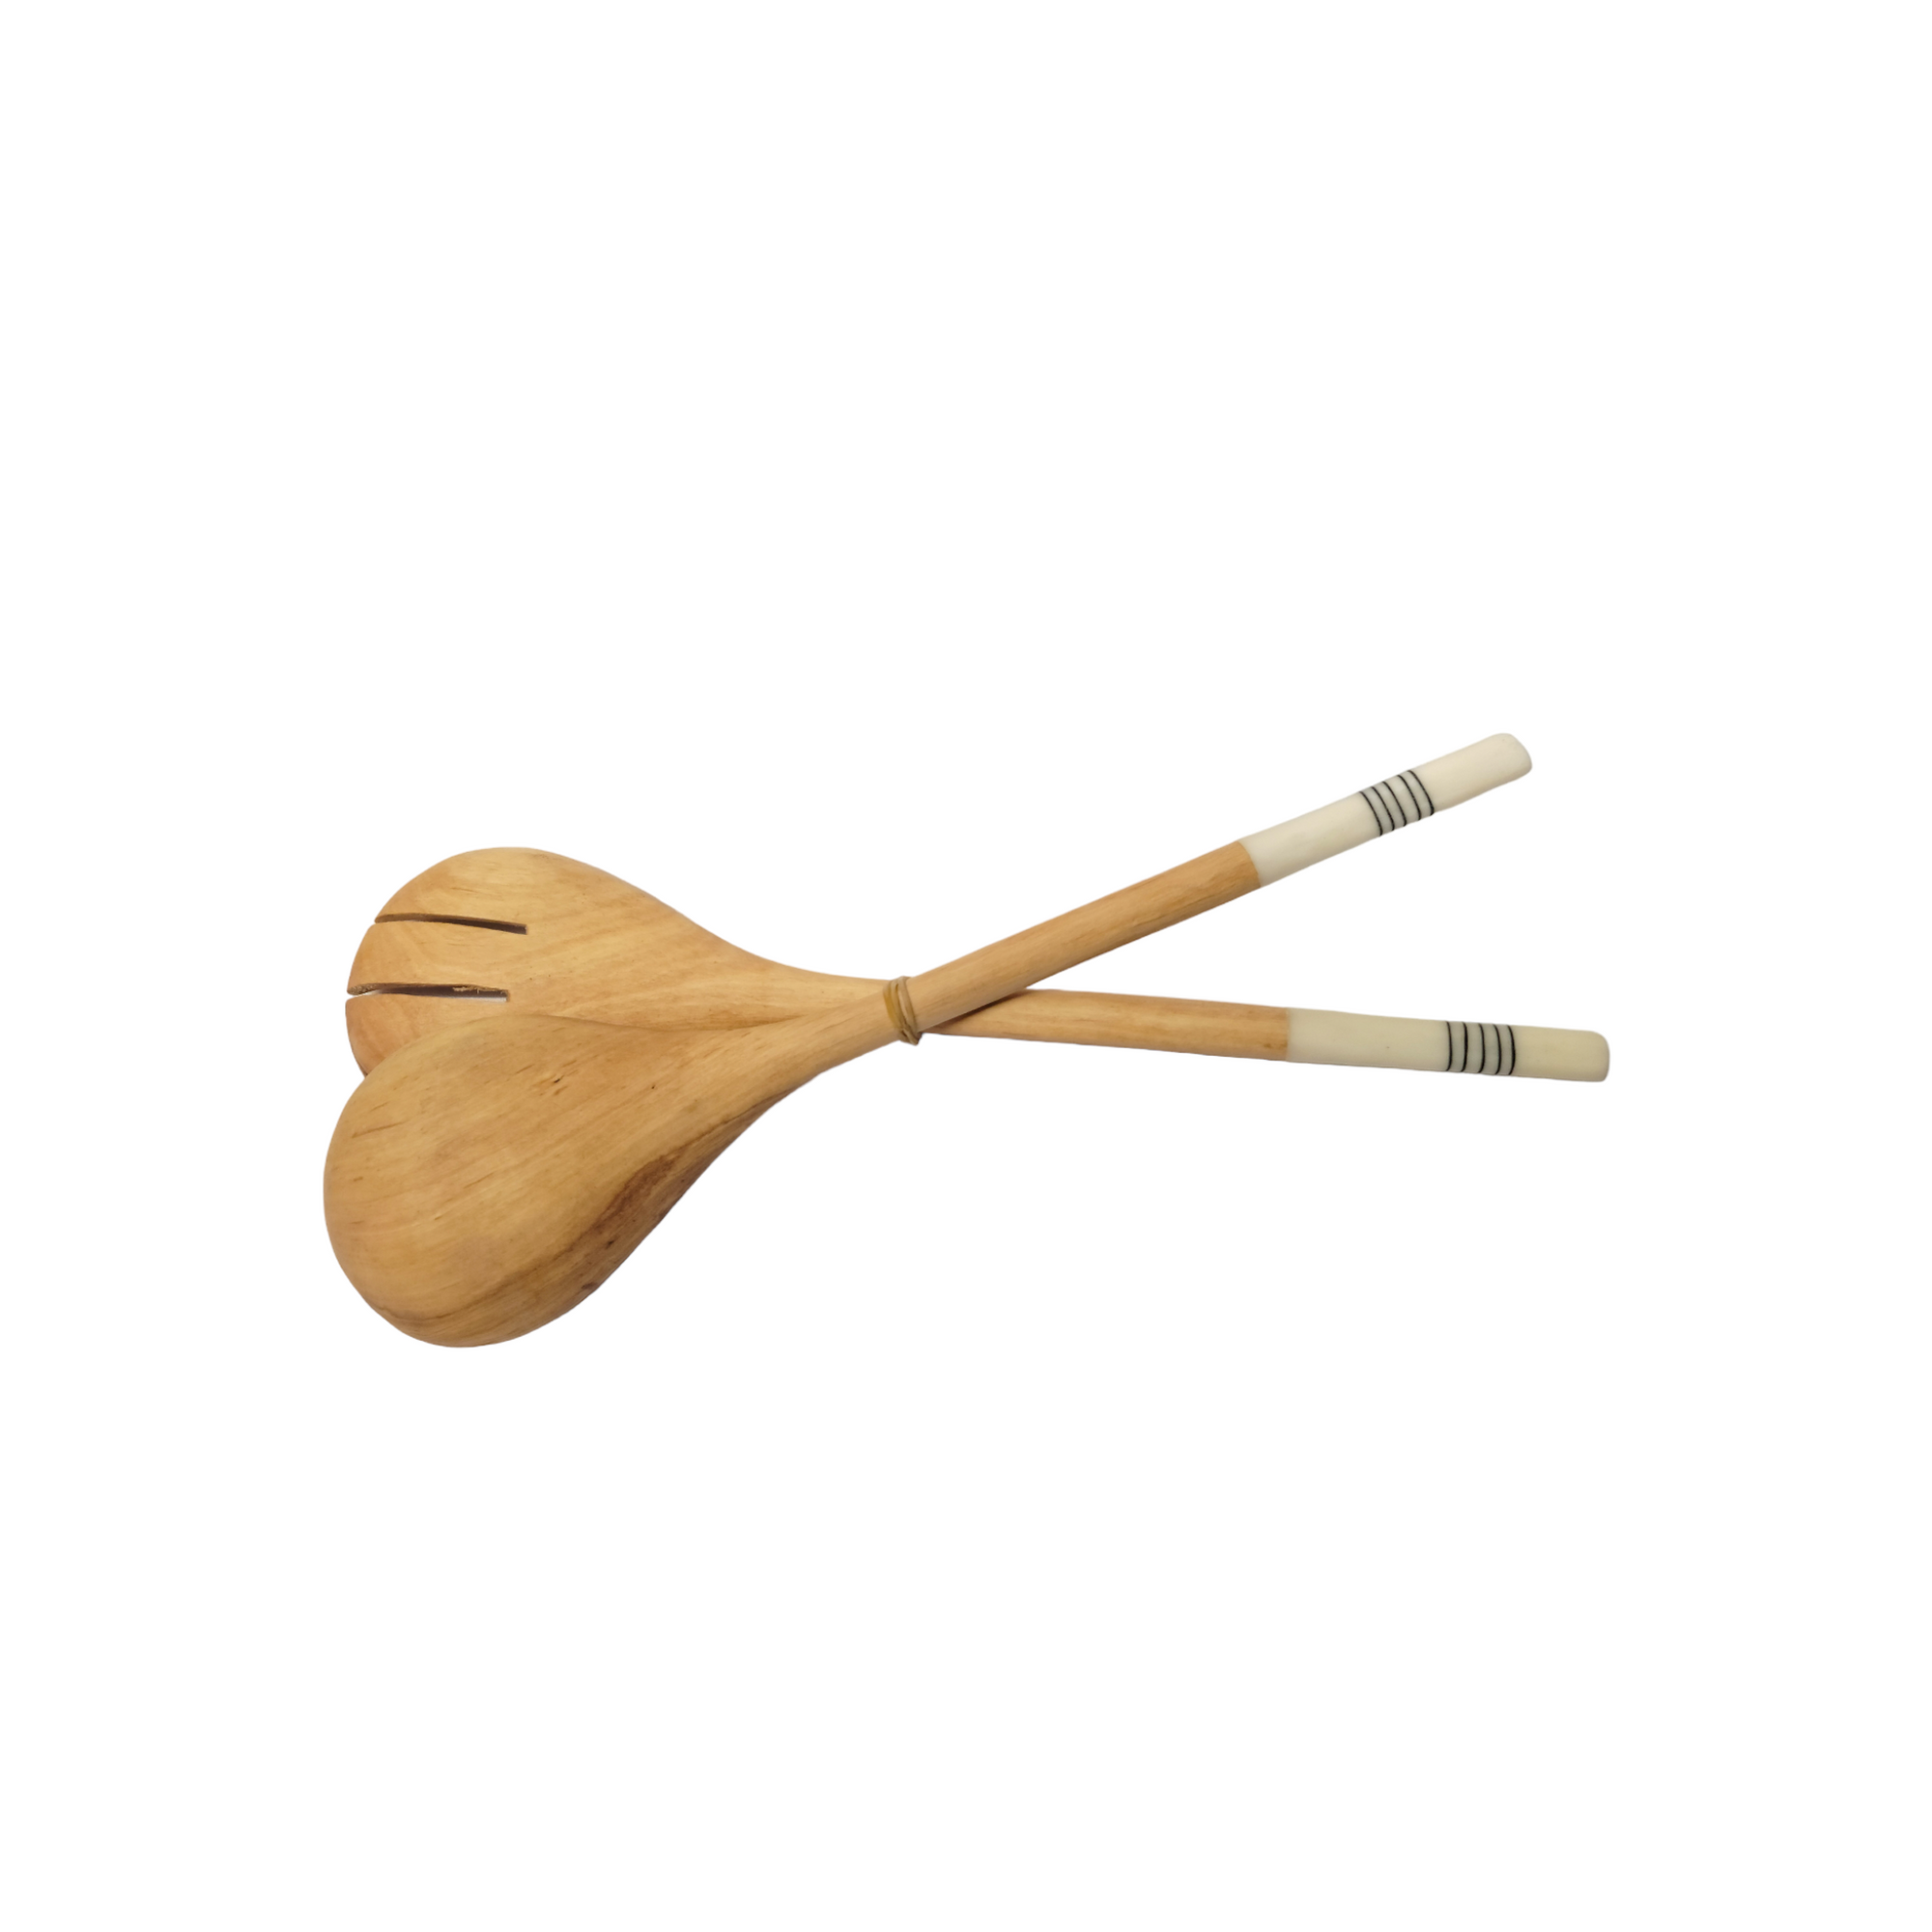 Wooden Spoons With White Tips